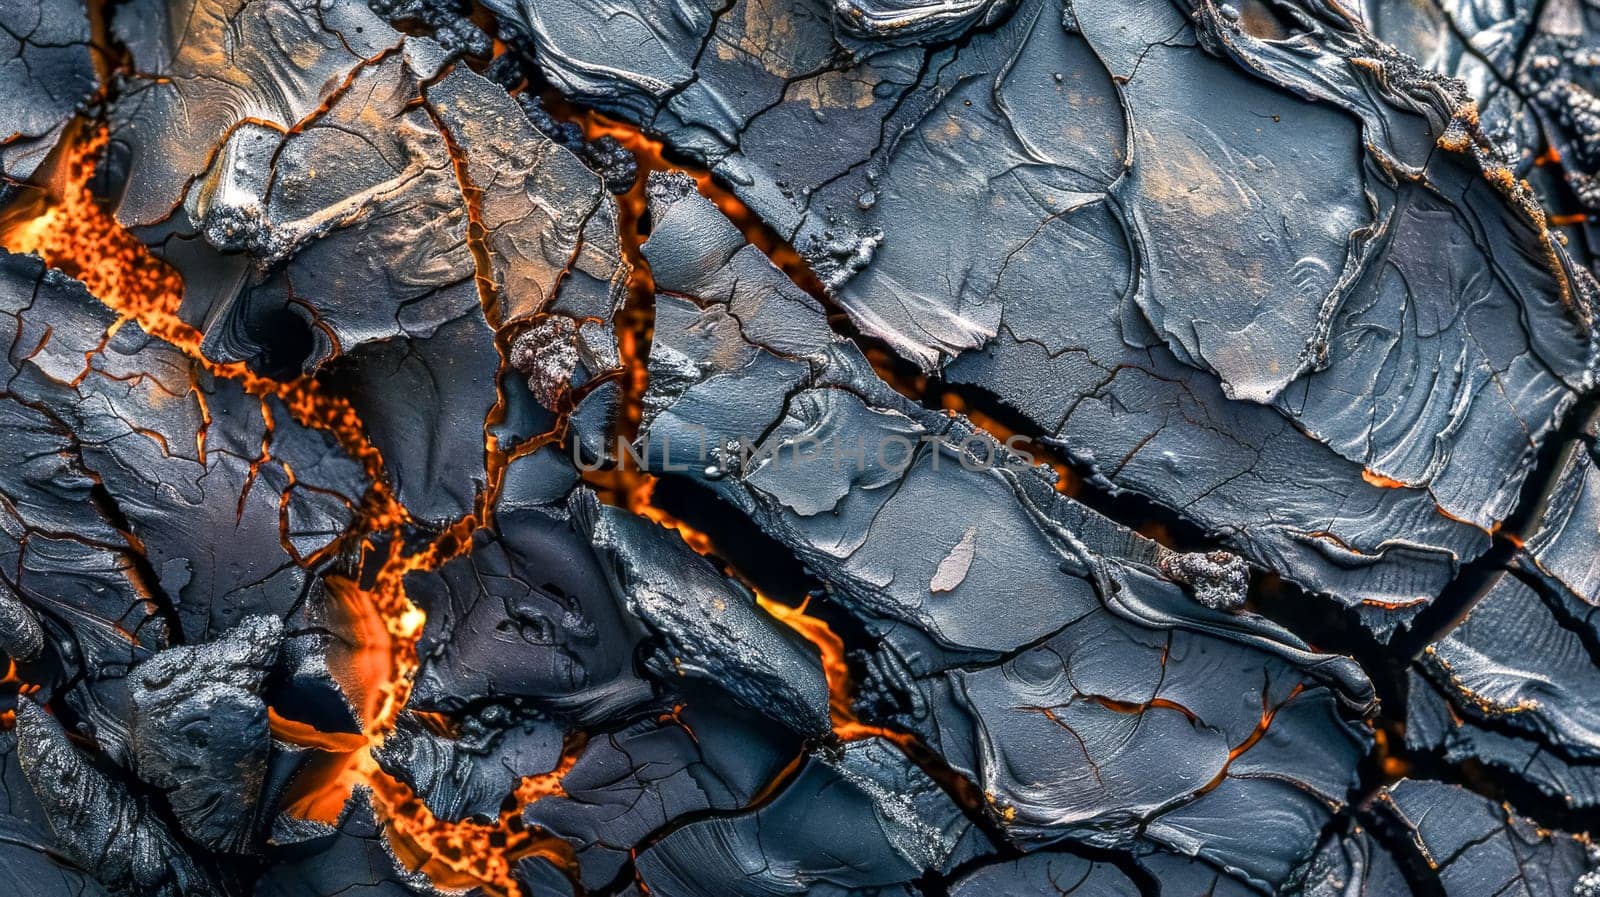 Macro shot of fiery cracks within a dark expanse of cooled lava